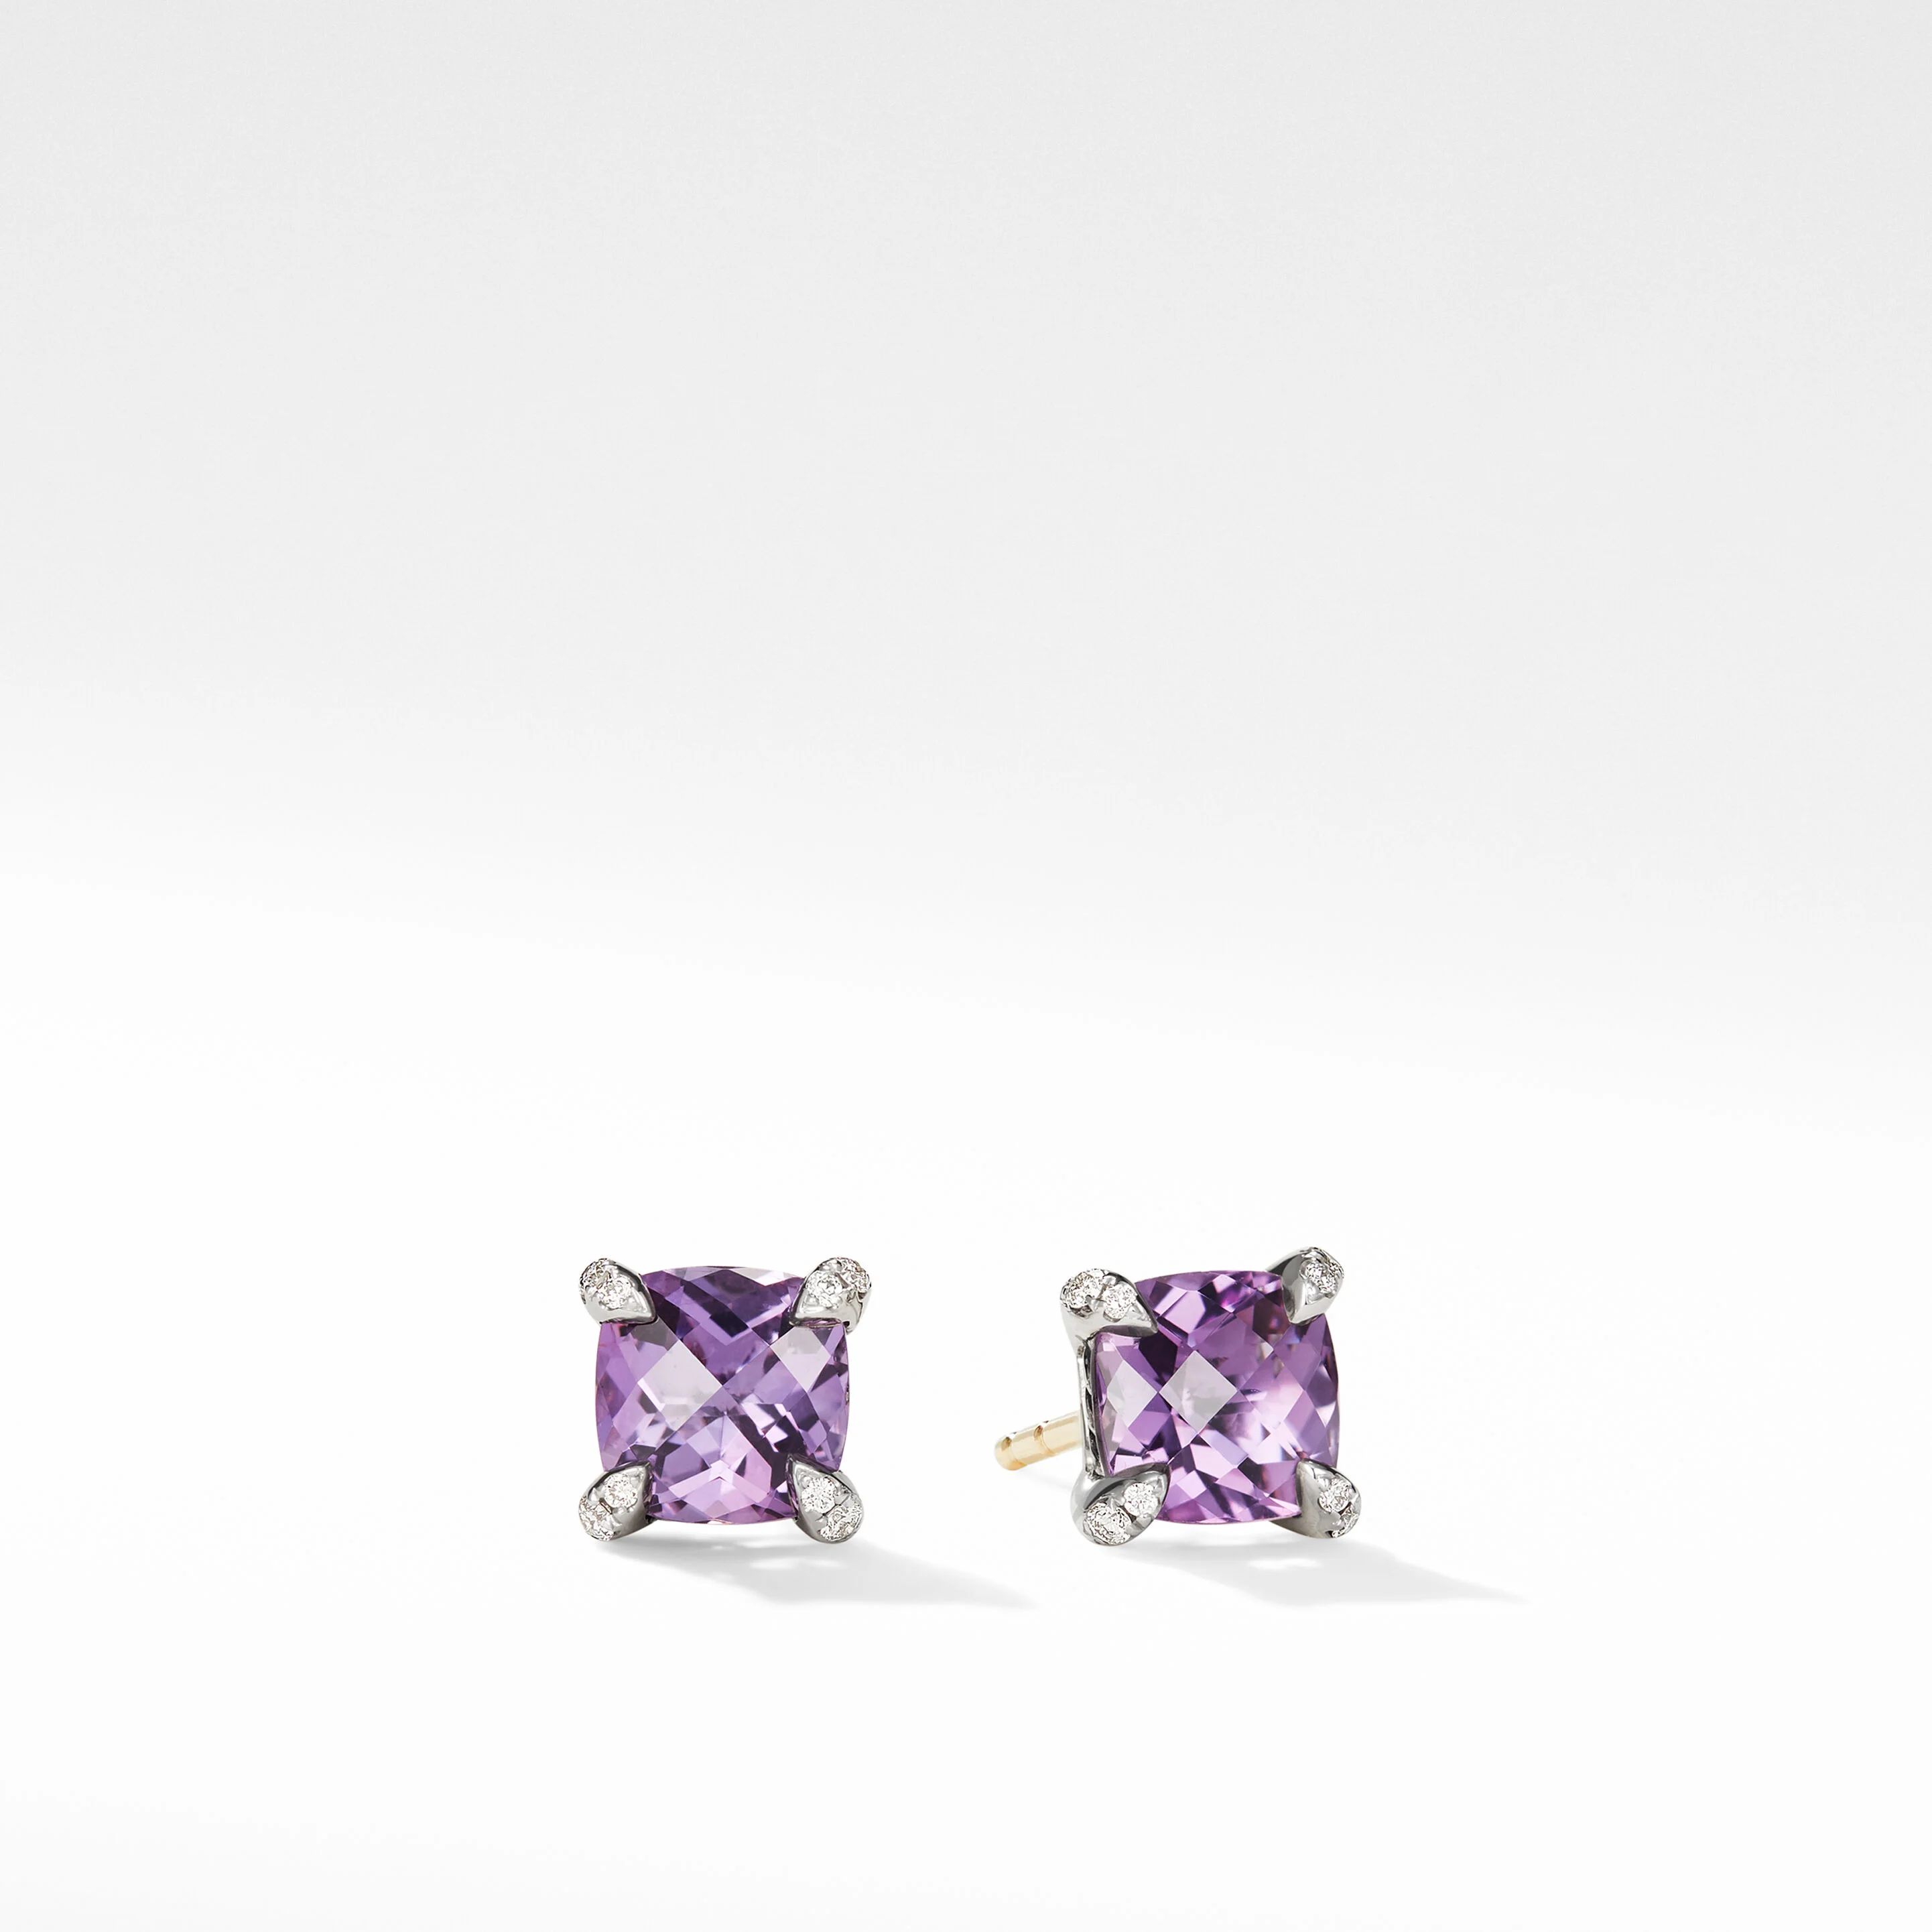 Petite Chatelaine® Stud Earrings in Sterling Silver with Amethyst and Pavé Diamonds | David Yurman